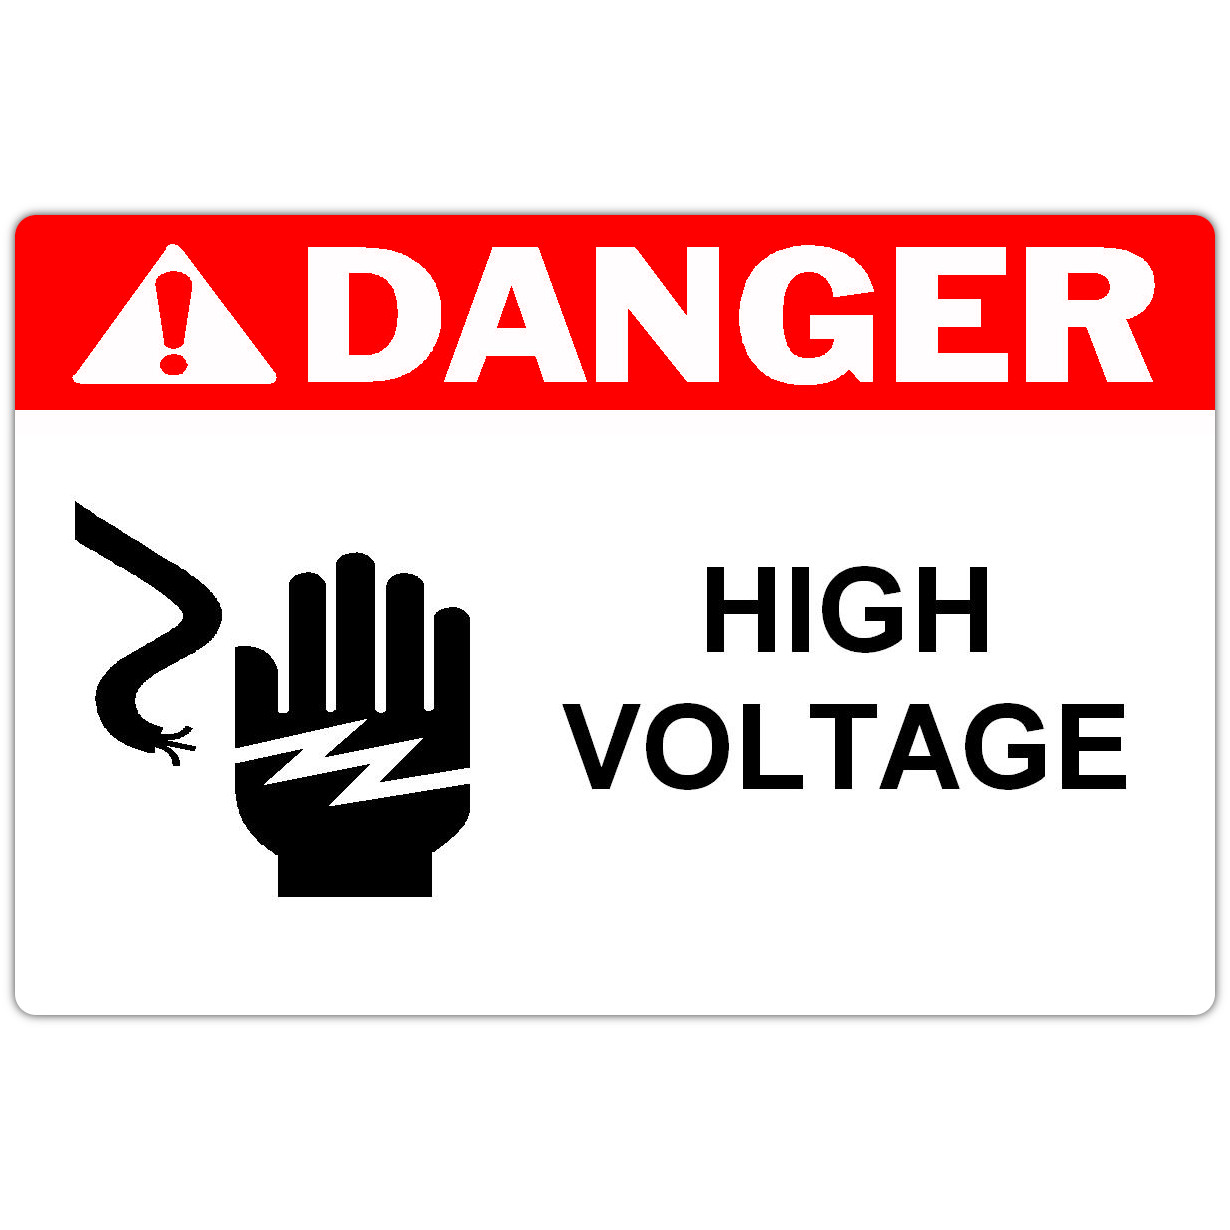 Detail view for 4" x 6" DANGER High Voltage Safety Label